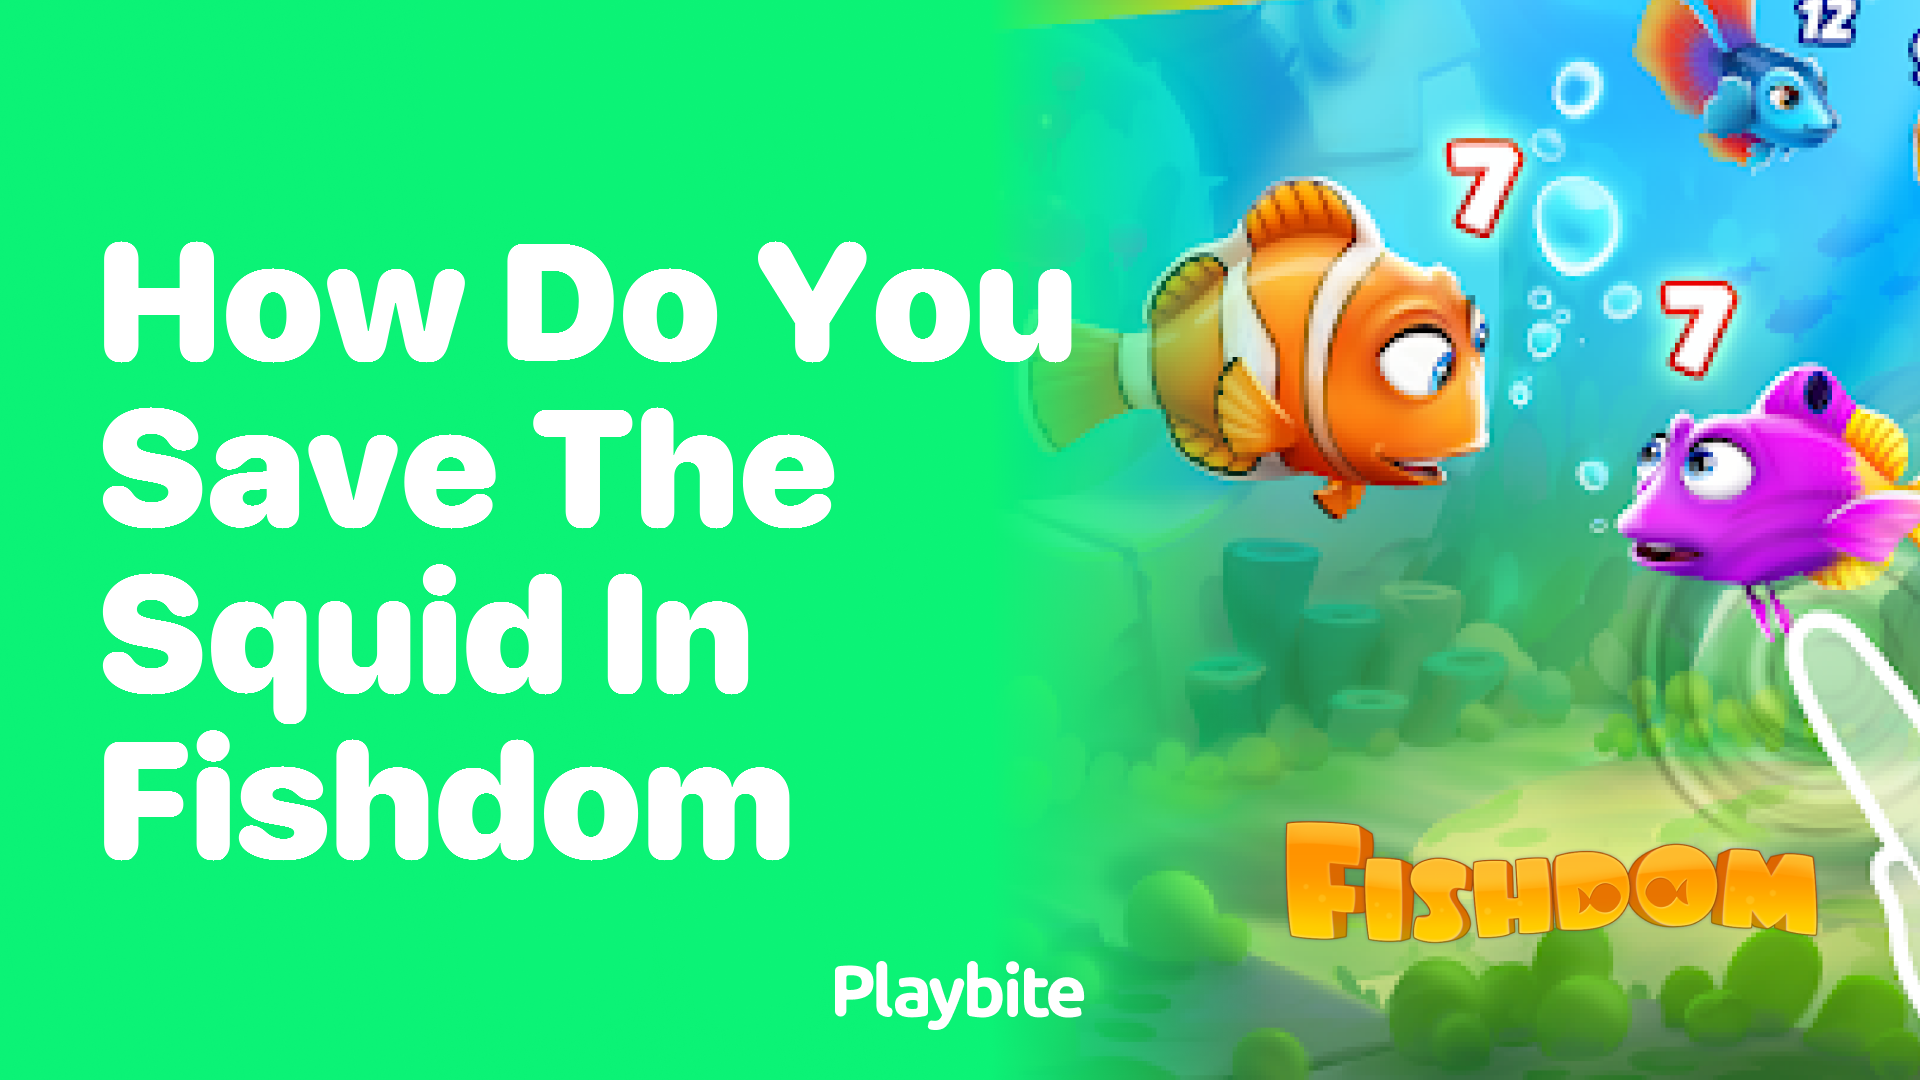 How Do You Save the Squid in Fishdom?